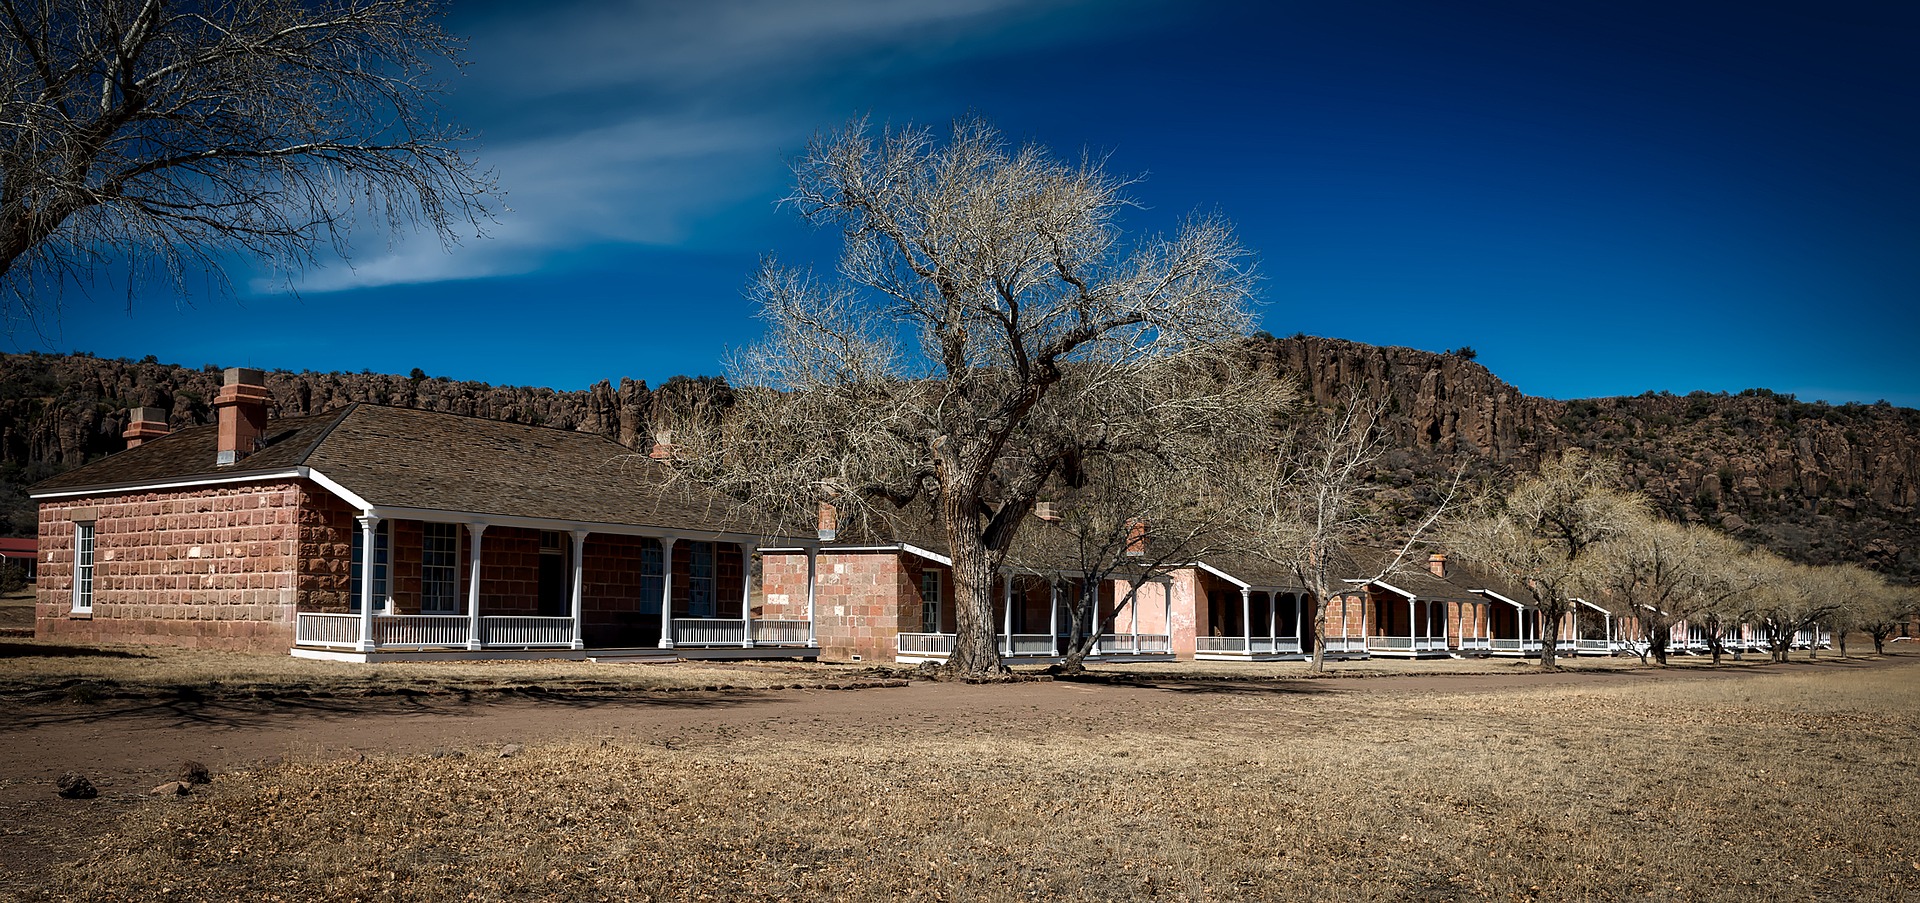 Military barracks lined up in Fort Davis.